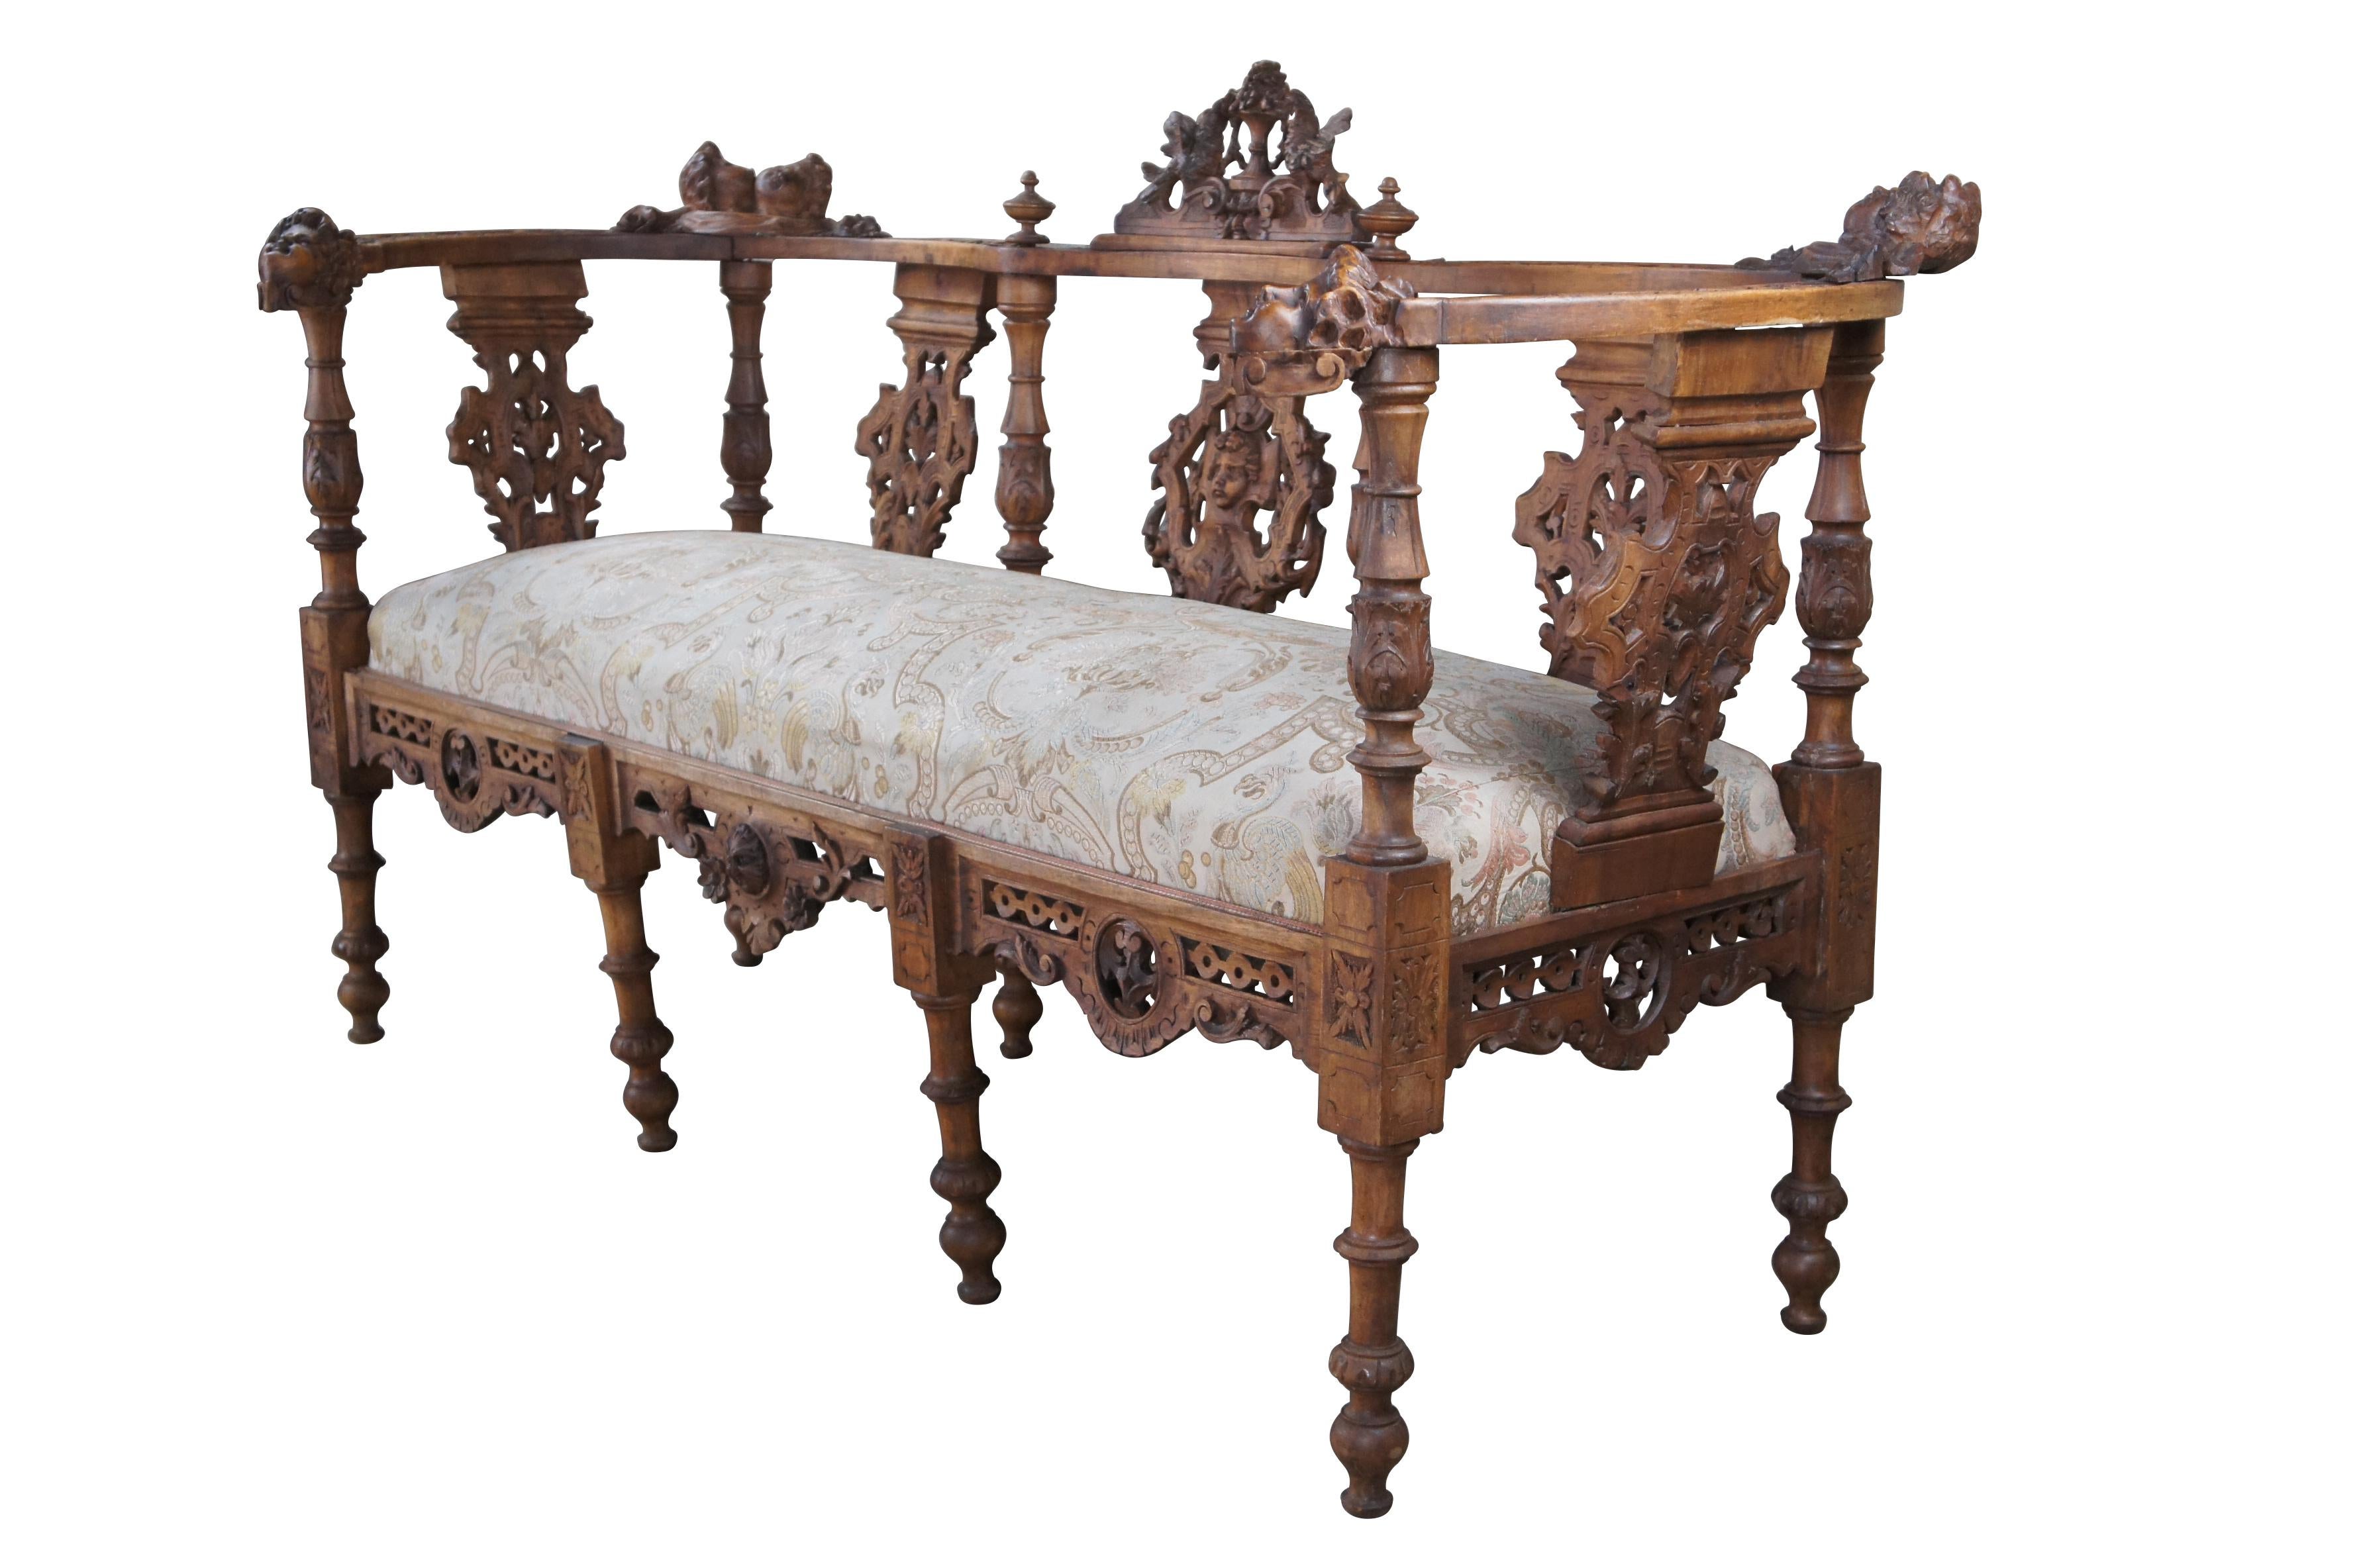 Antique Italian Neo-Renaissance parlor settee / loveseat / bench, circa 1870s.  Made of walnut featuring Neoclassical styling with high relief figural carvings of cherubs / puttis, Northwind faces, doves / birds, acanthus / floral and reticulated /